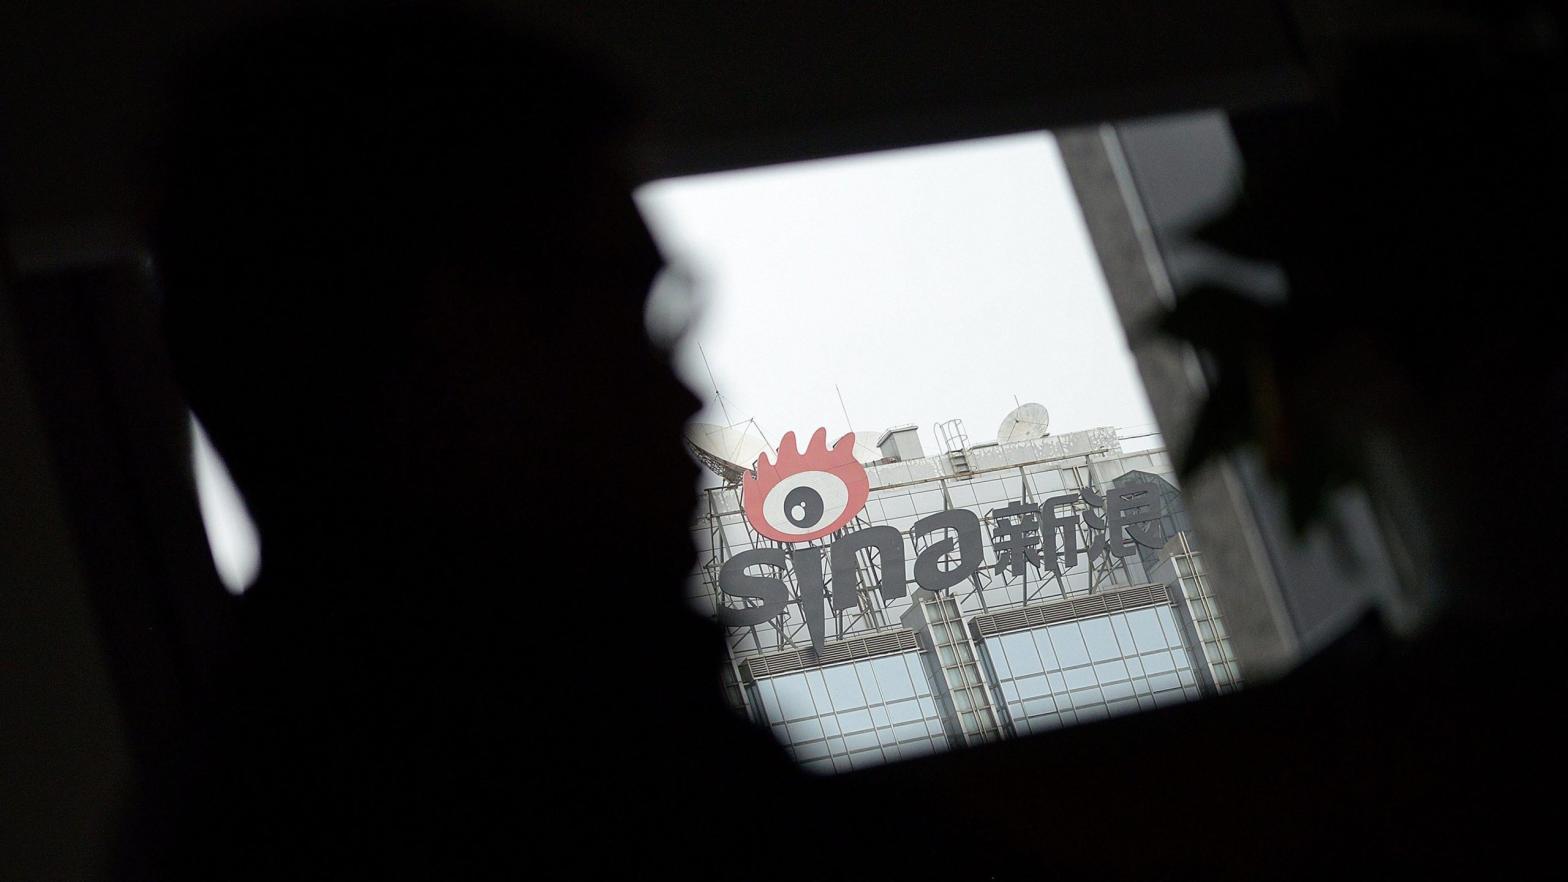 Signage of Sina Weibo, the social media site examined in the study, in Beijing in April 2014. (Photo: Wang Zhao / AFP, Getty Images)